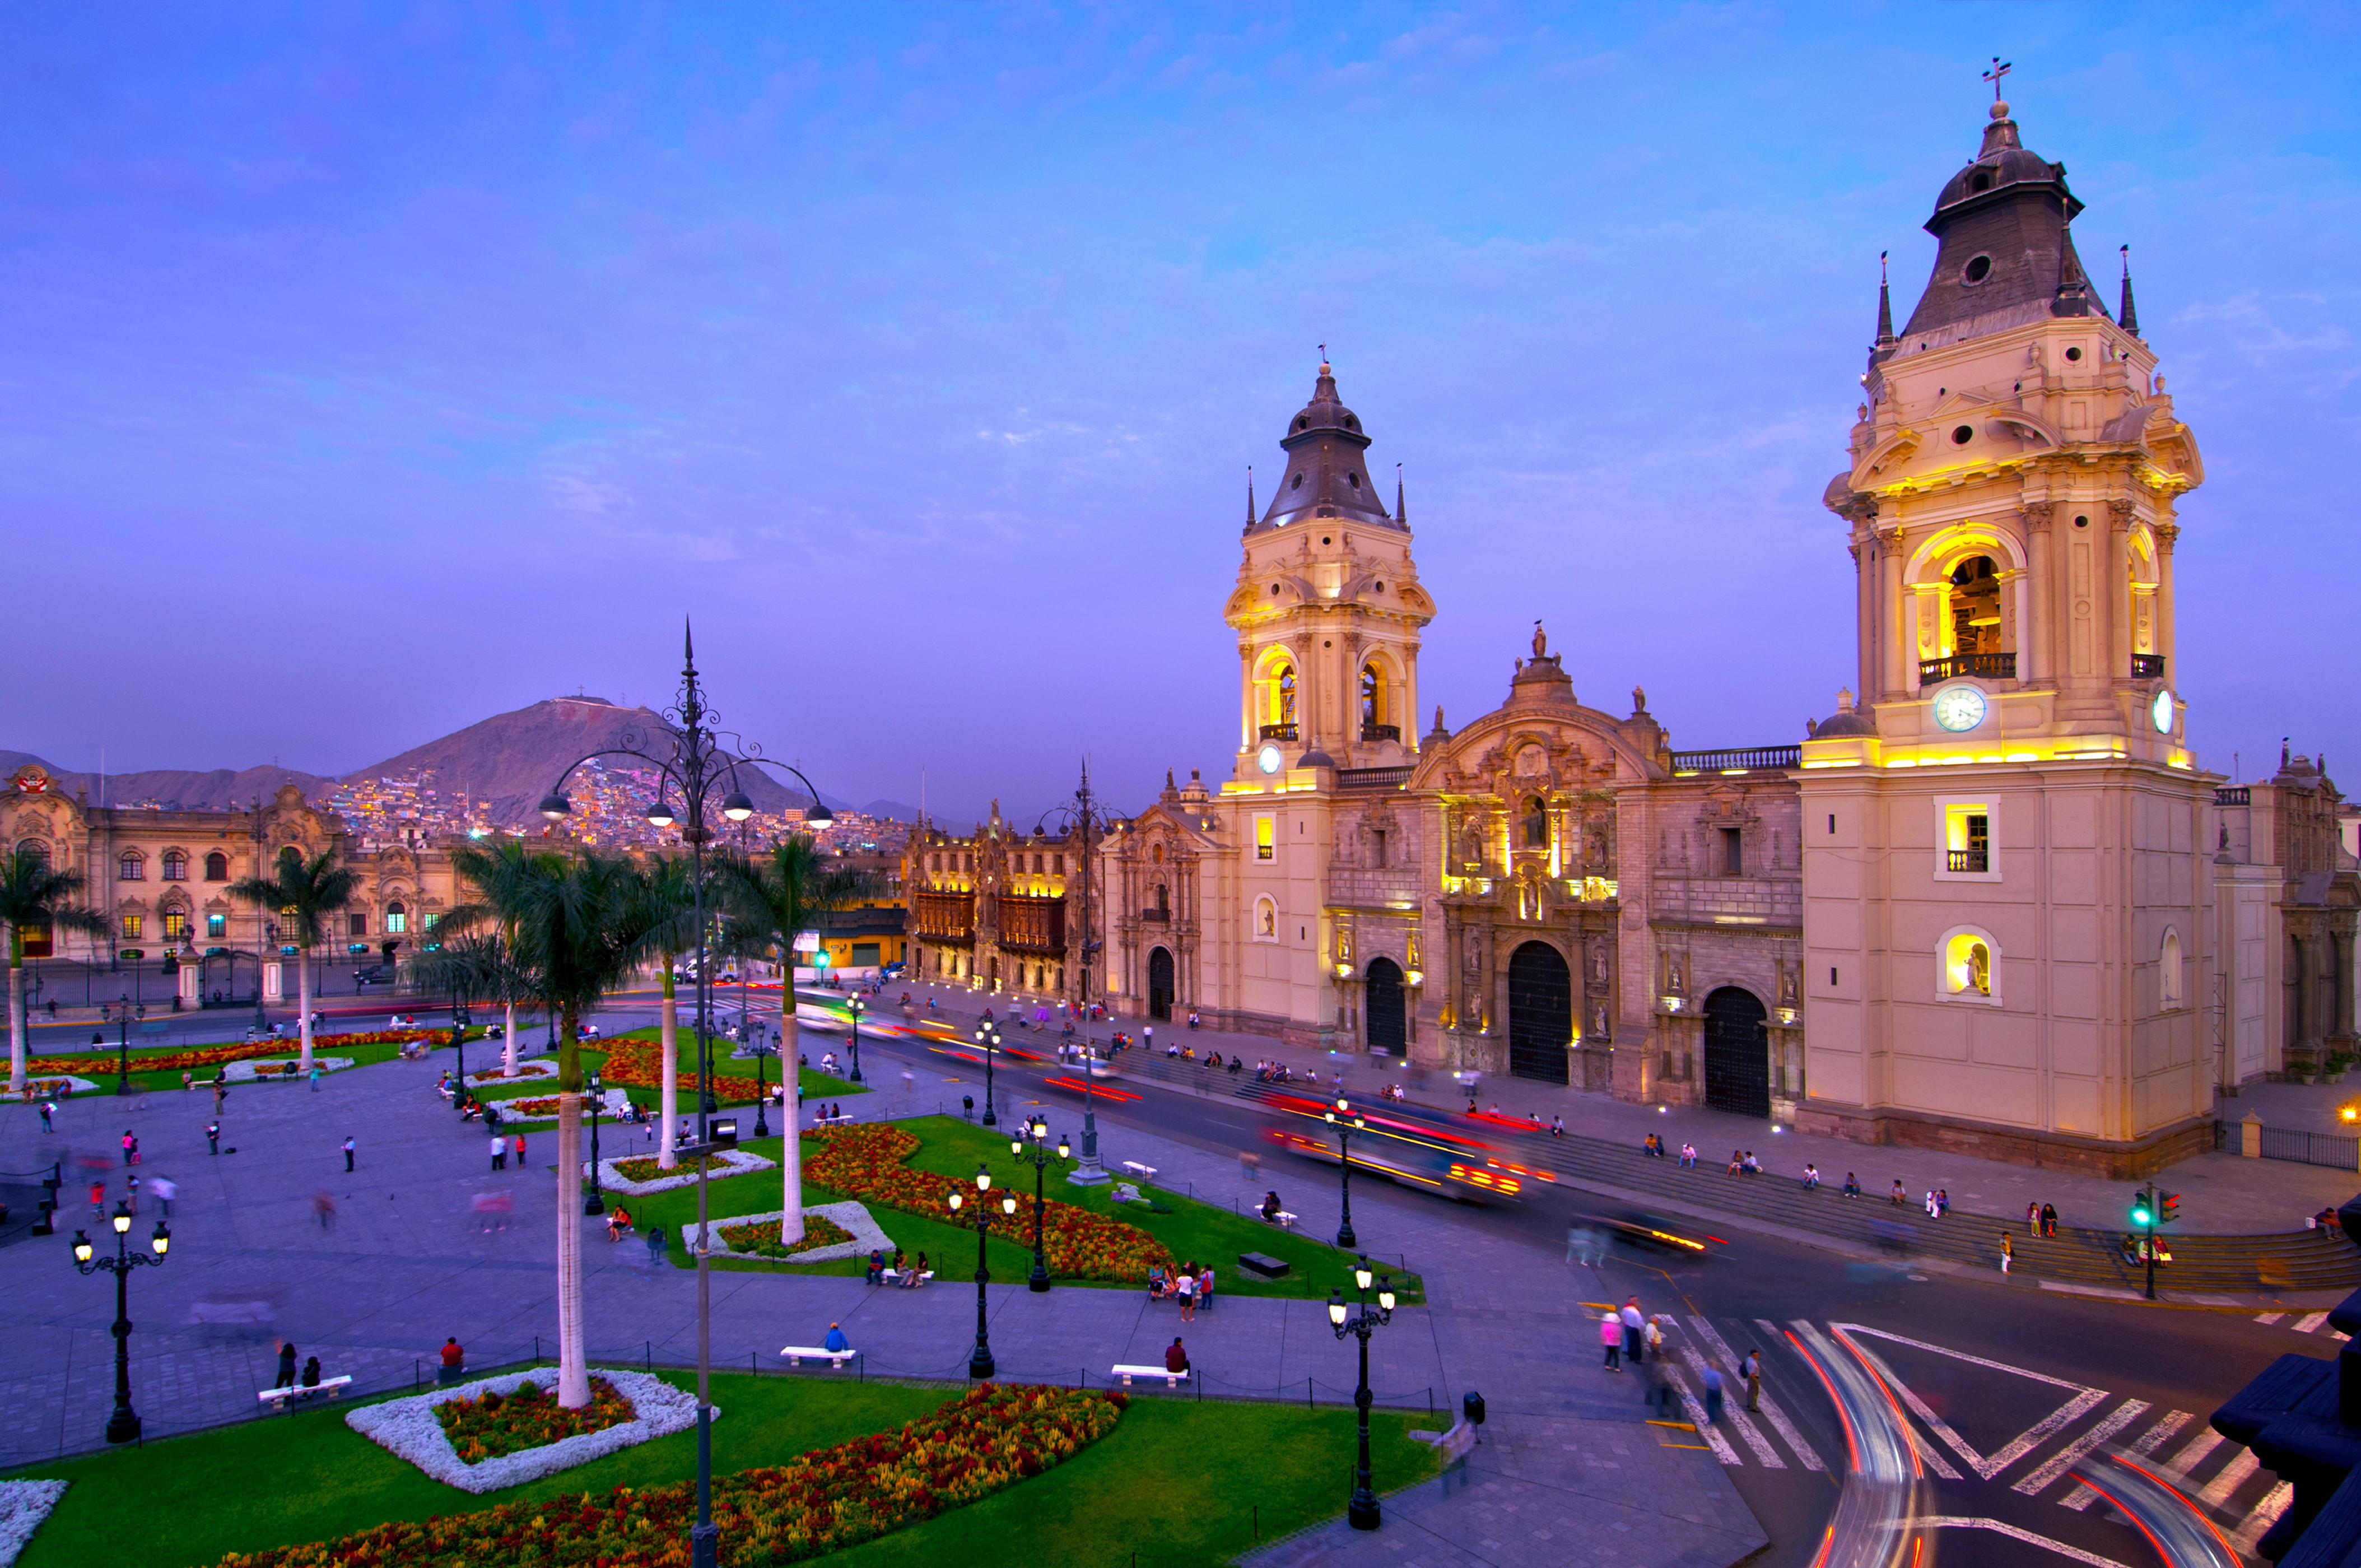 <p><strong>Population: </strong>10,556,000</p><p><strong>Known for:</strong> Lima, the capital of Peru, is praised as the culinary capital of South America and known for its historic city center and cultural heritage.</p><p><strong>Average monthly rent for a one-bedroom home in the city center: </strong>$538.15</p><p><strong>Monthly costs for a single person (excluding housing):</strong> $563.50</p><p><strong>Monthly costs for a family of four (excluding housing): </strong>$1,991.60</p><p><strong>Cost of a cappuccino:</strong> $2.76</p><p><strong>Cost of a three-course meal for two:</strong> $32.68</p><p><strong>Monthly cost of a gym membership</strong>: $32.56</p><p><strong>Someone who lives there said:</strong> "Peru is an incredible place to live. There is so much variety in terms of outdoor activities like hiking and surfing, along with really fantastic food. Lima itself has lots of beautiful neighborhoods and architecture, along with really friendly people," <a href="https://www.spendlifetraveling.com/living-in-lima-peru/">Zhalya and Thomas told Spend Life Traveling</a>.</p><p><strong>It might be hard to live there because:</strong> Heavy traffic and congestion can make getting around a city a bit difficult.</p>